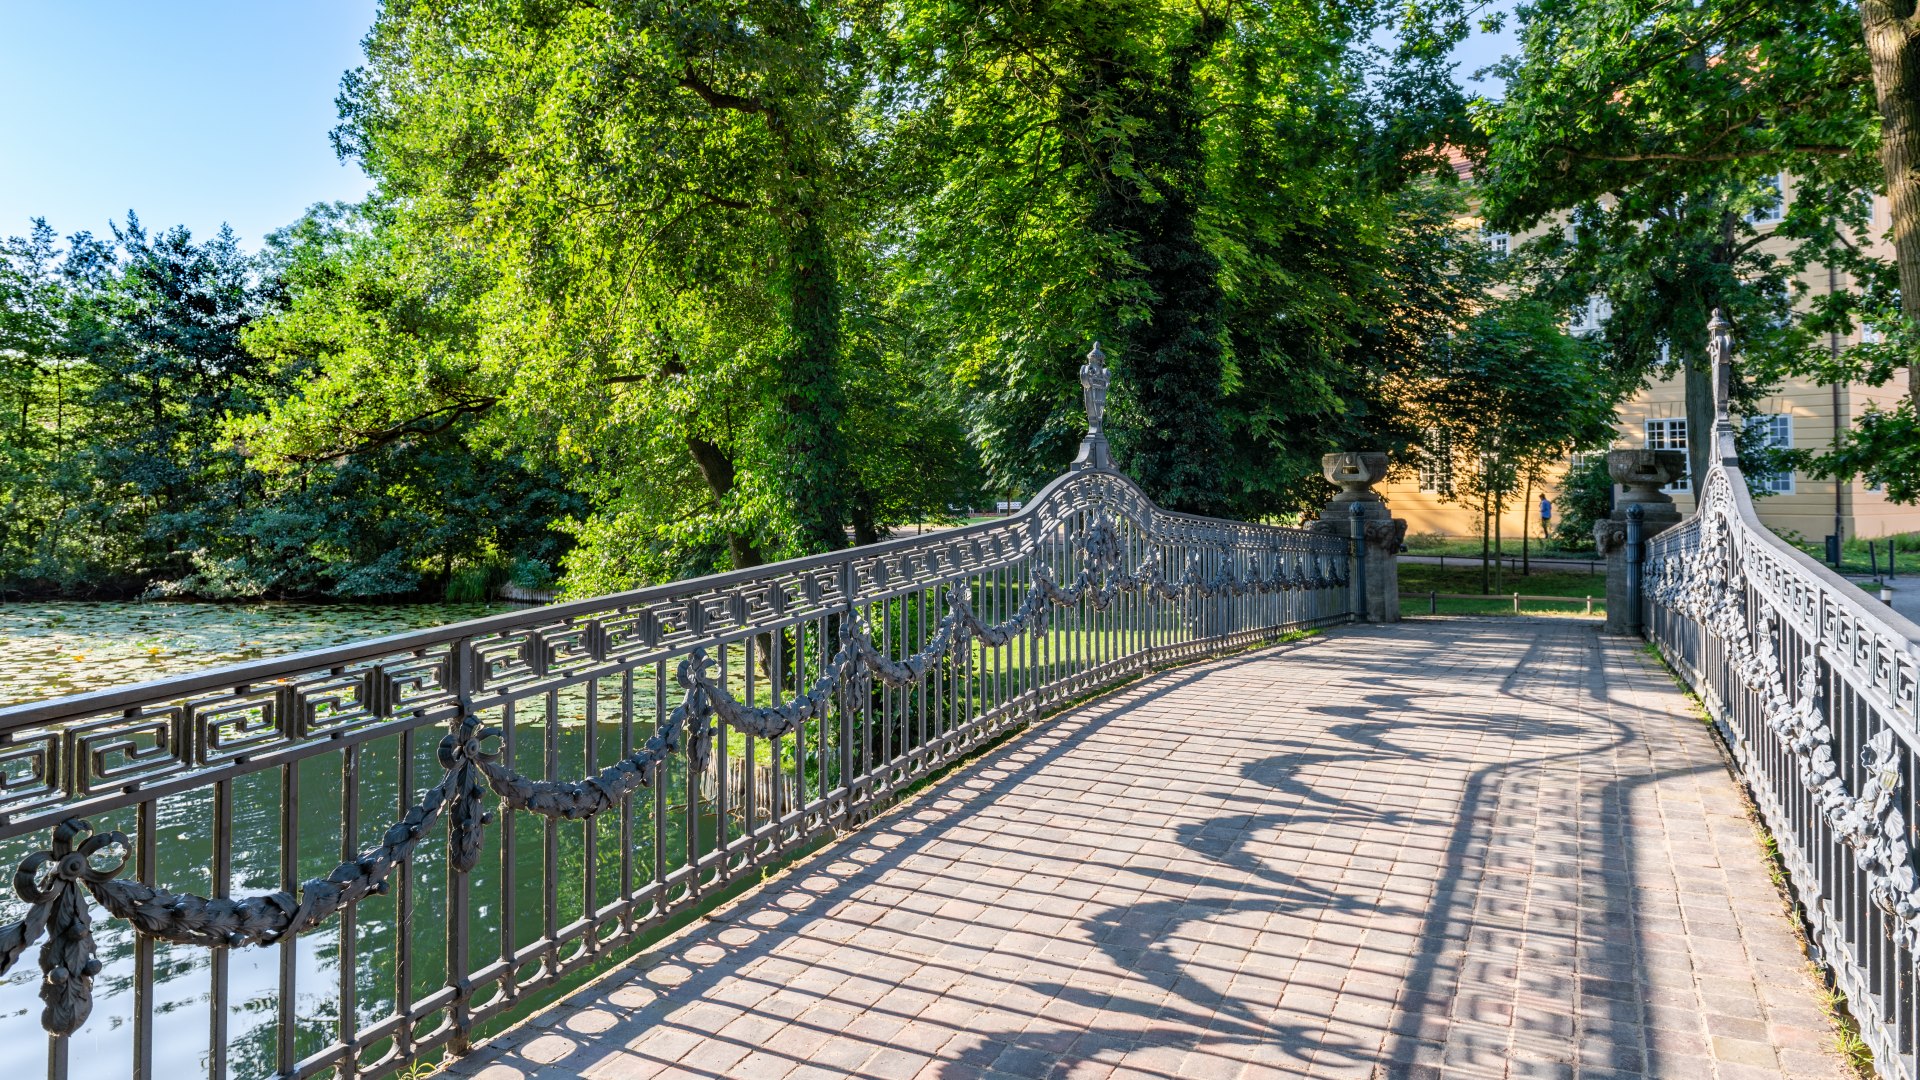 Over a picturesque curved bridge to Mirow Castle.
, © TMV/Tiemann